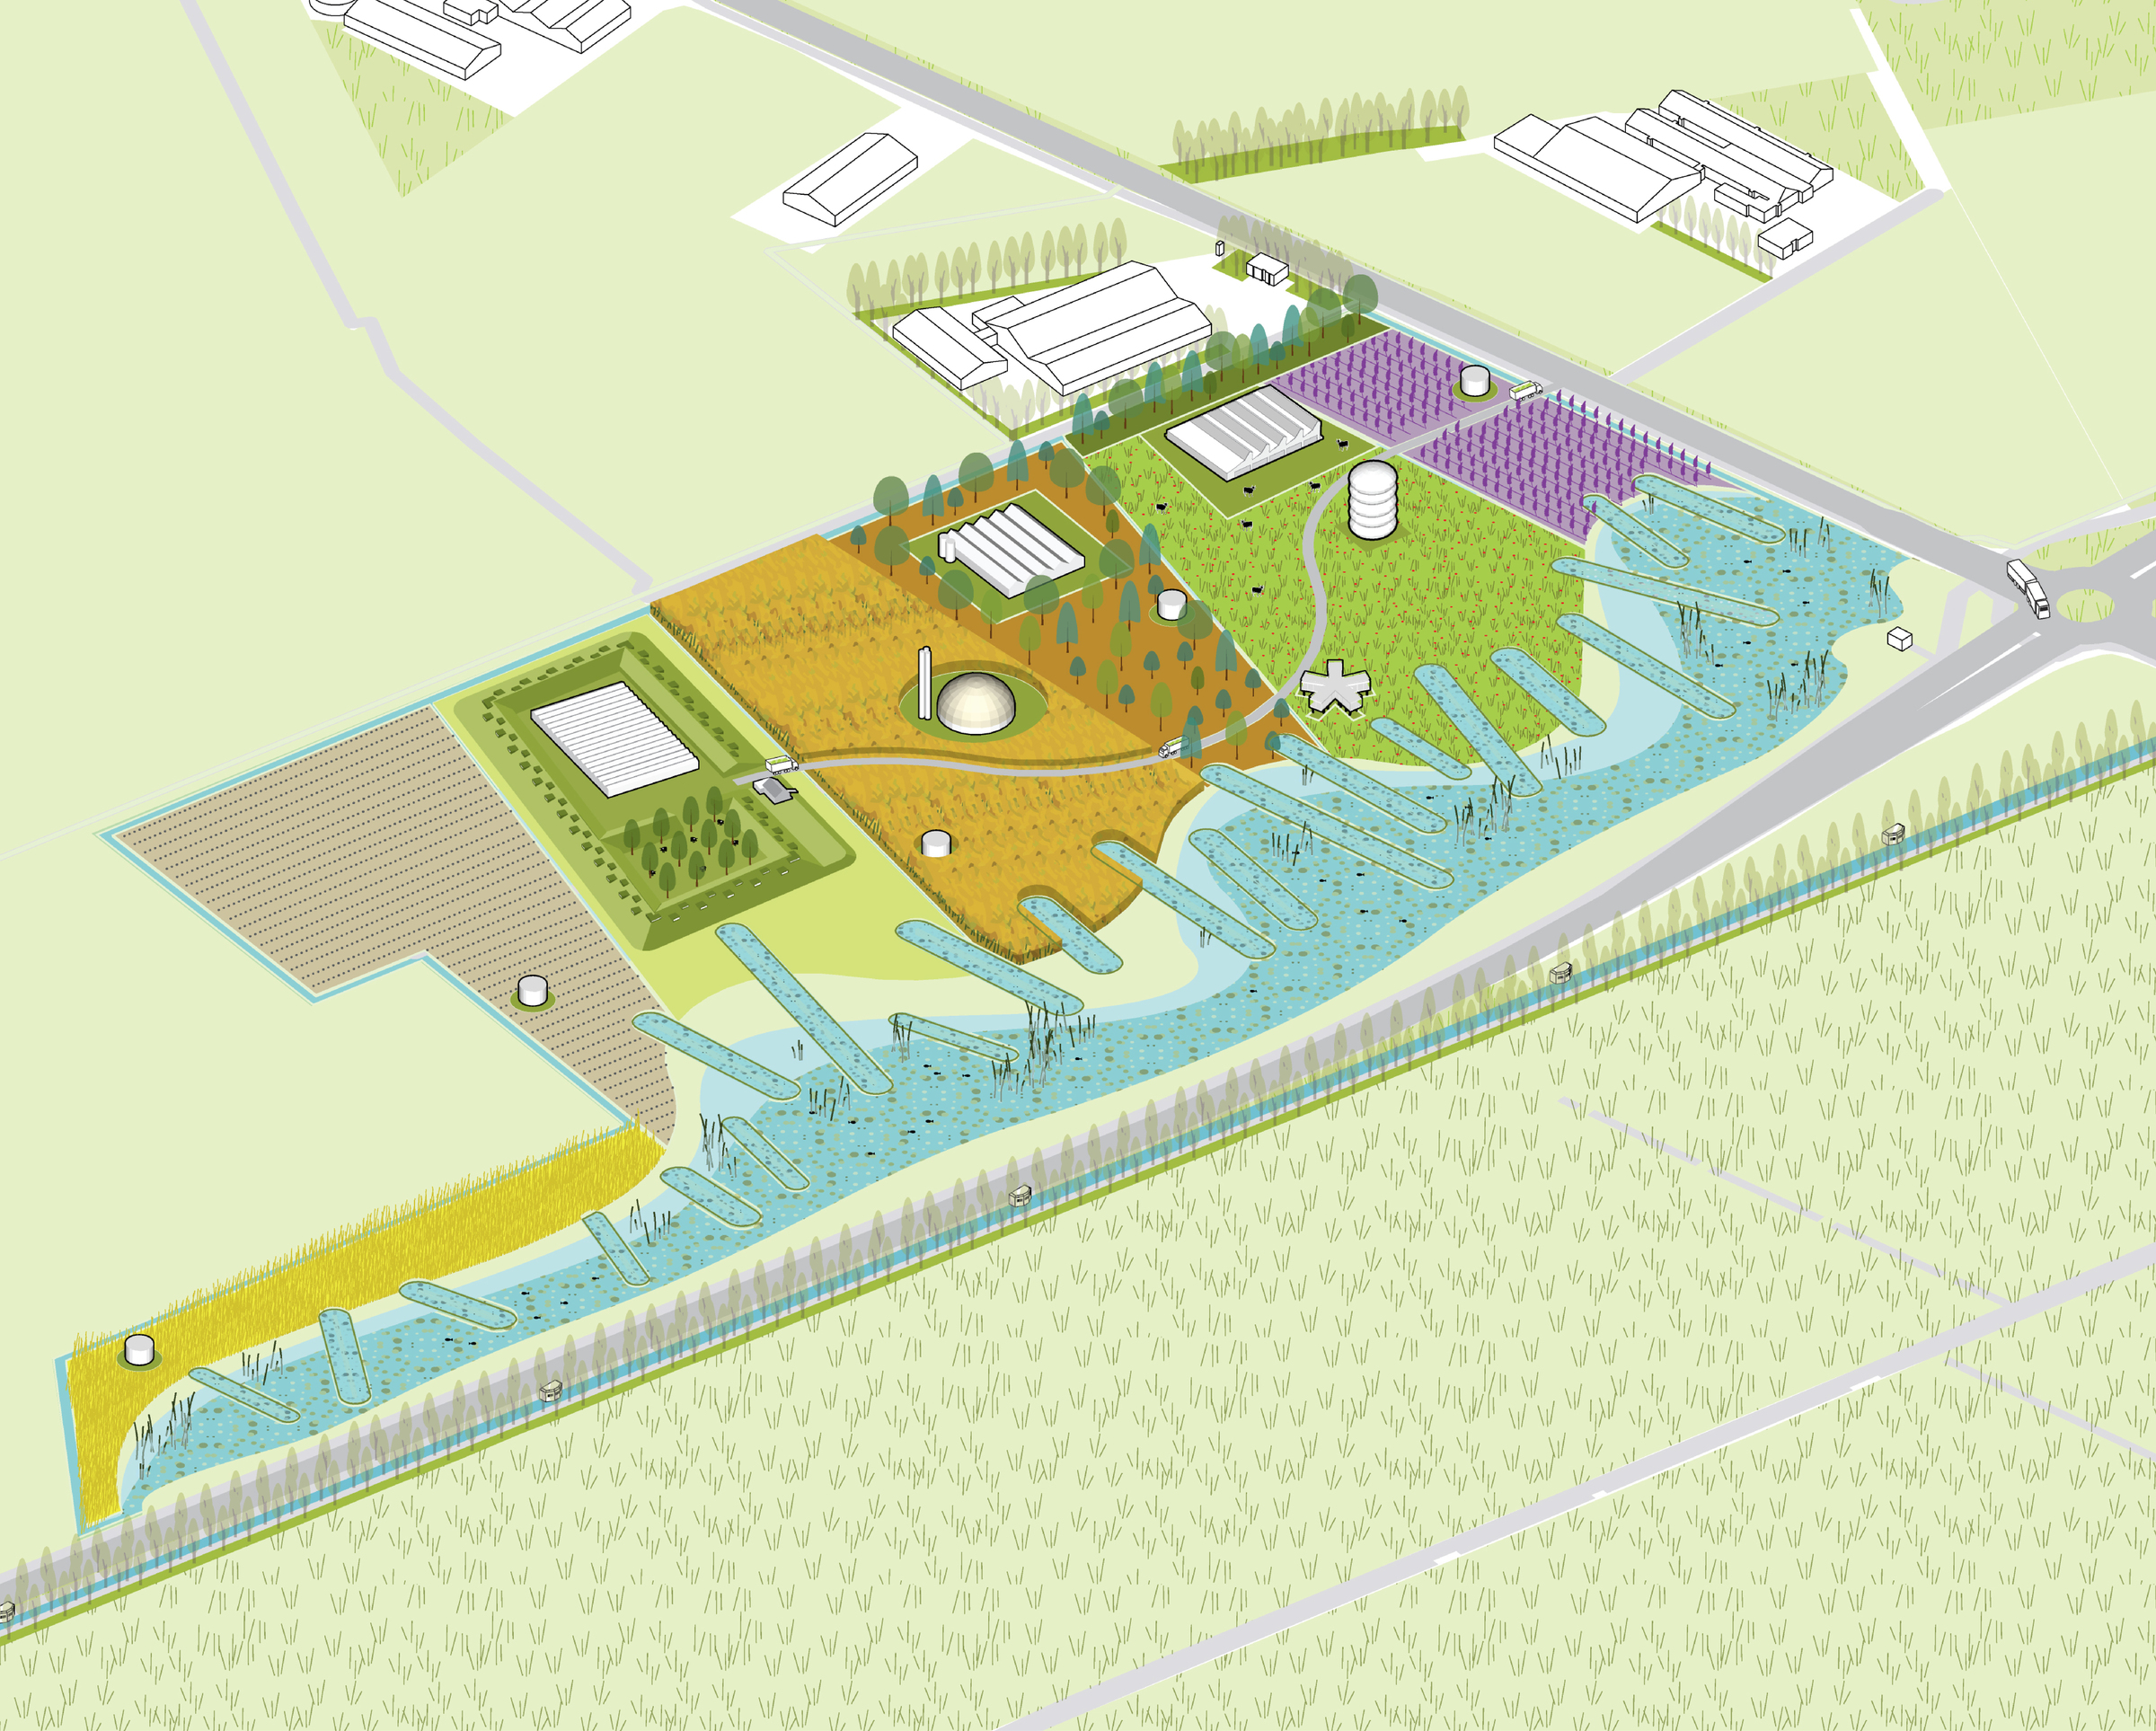 Concept design version 2, animal feed production, manure processing and livestock farms